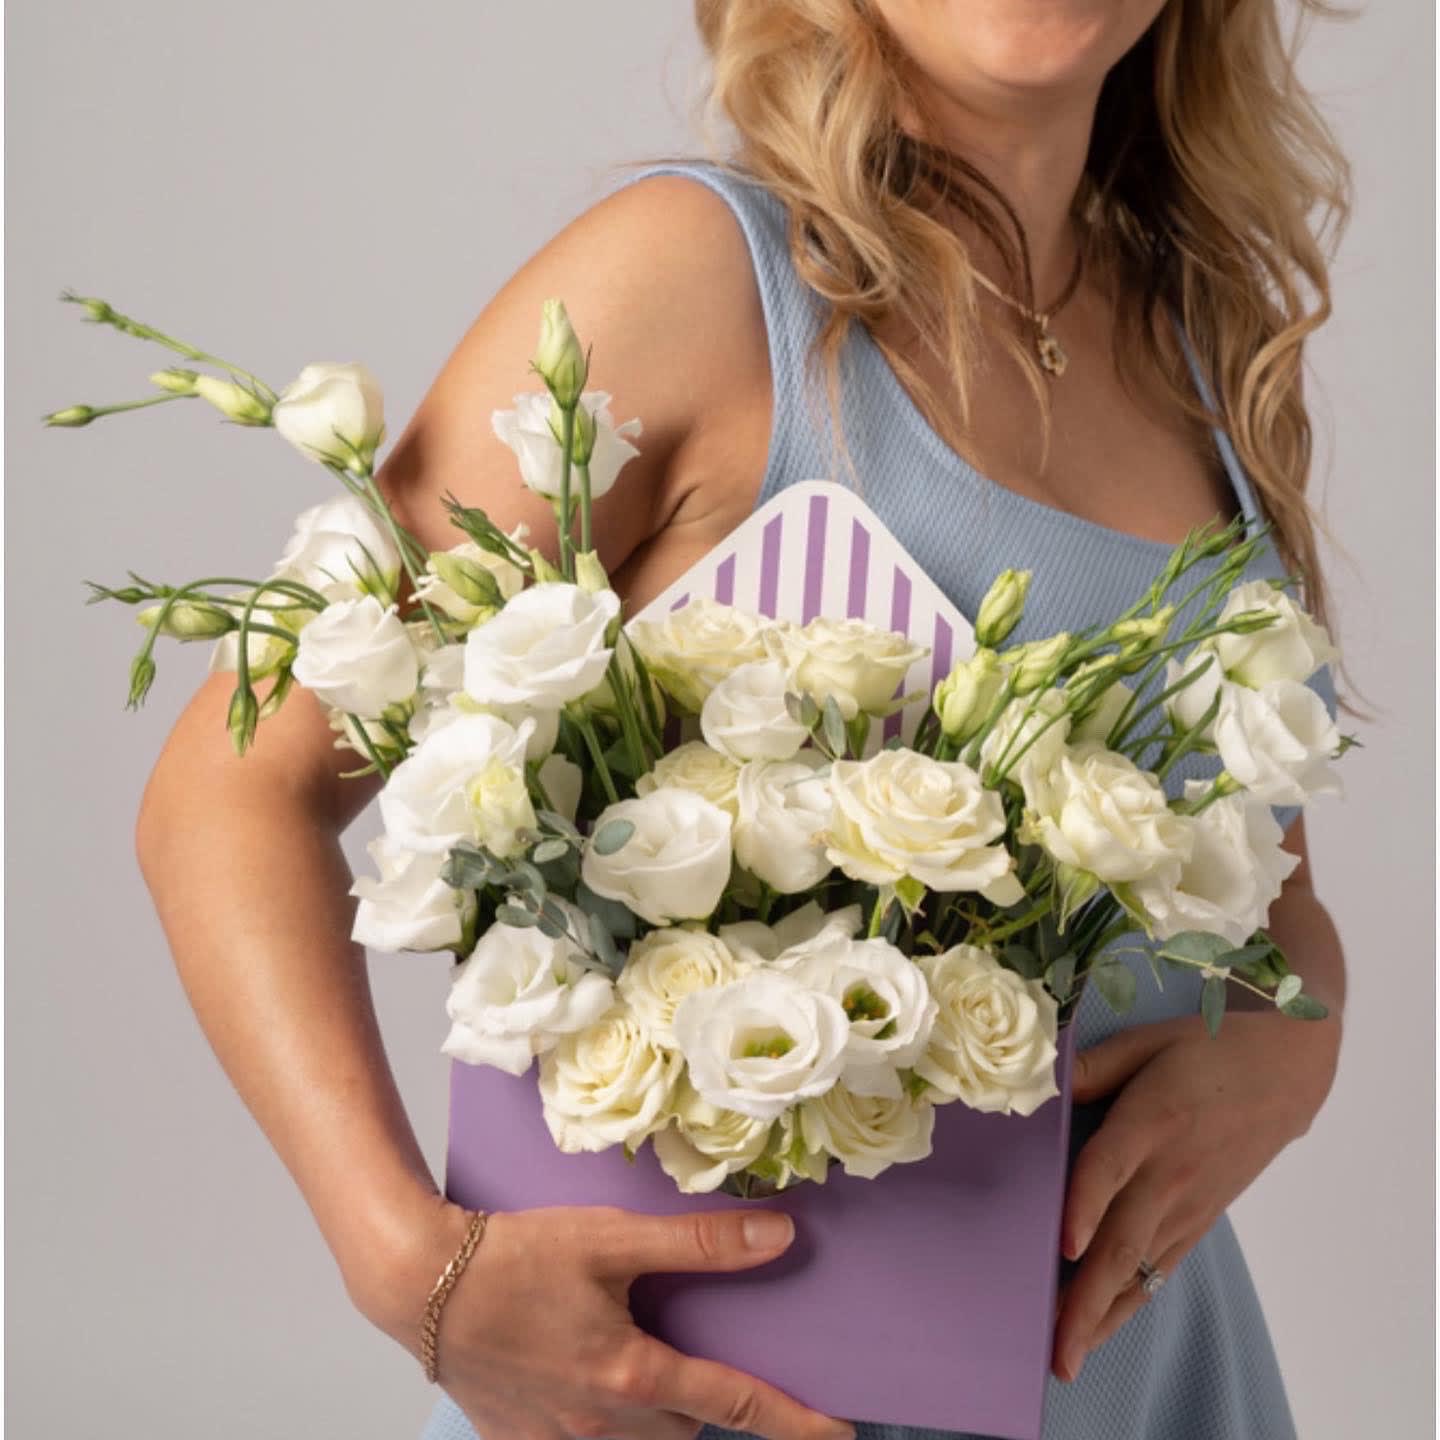 Eternal love envelope box - Beautiful envelop box in white spray roses with Lisianthus